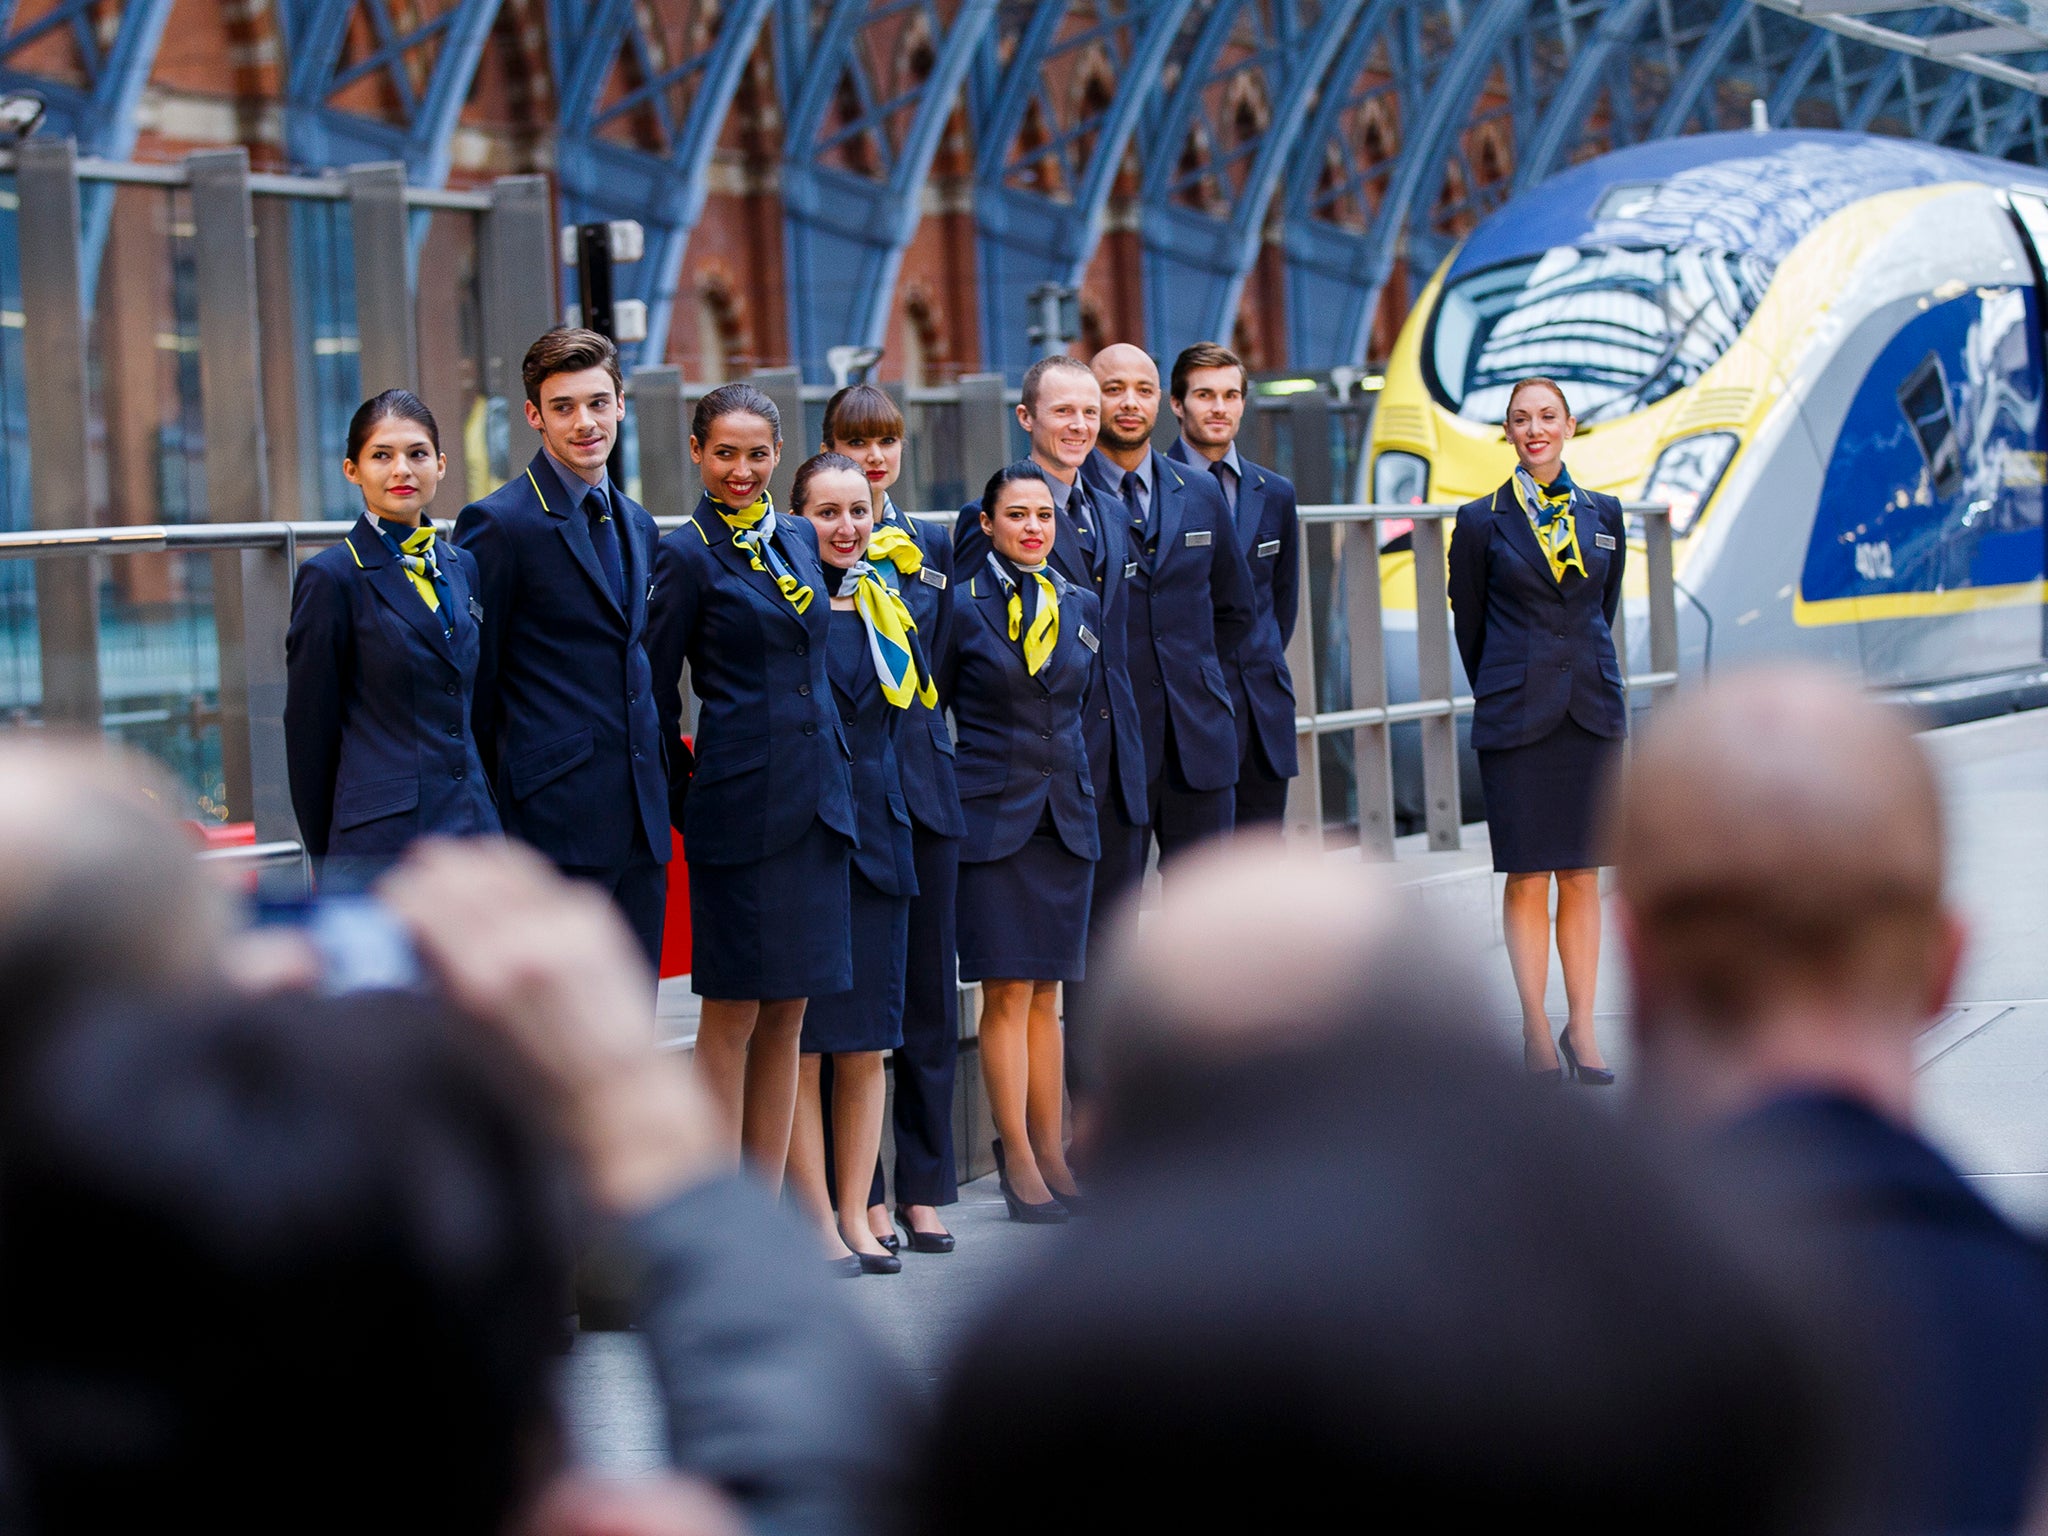 Members of Eurostar staff attend the unveiling Eurostar's brand new e320 fleet today complete with a live reveal of the train and special guests including Raymond Blanc and a catwalk show with 20 Eurostar staff at St Pancras Station on November 13, 2014 i